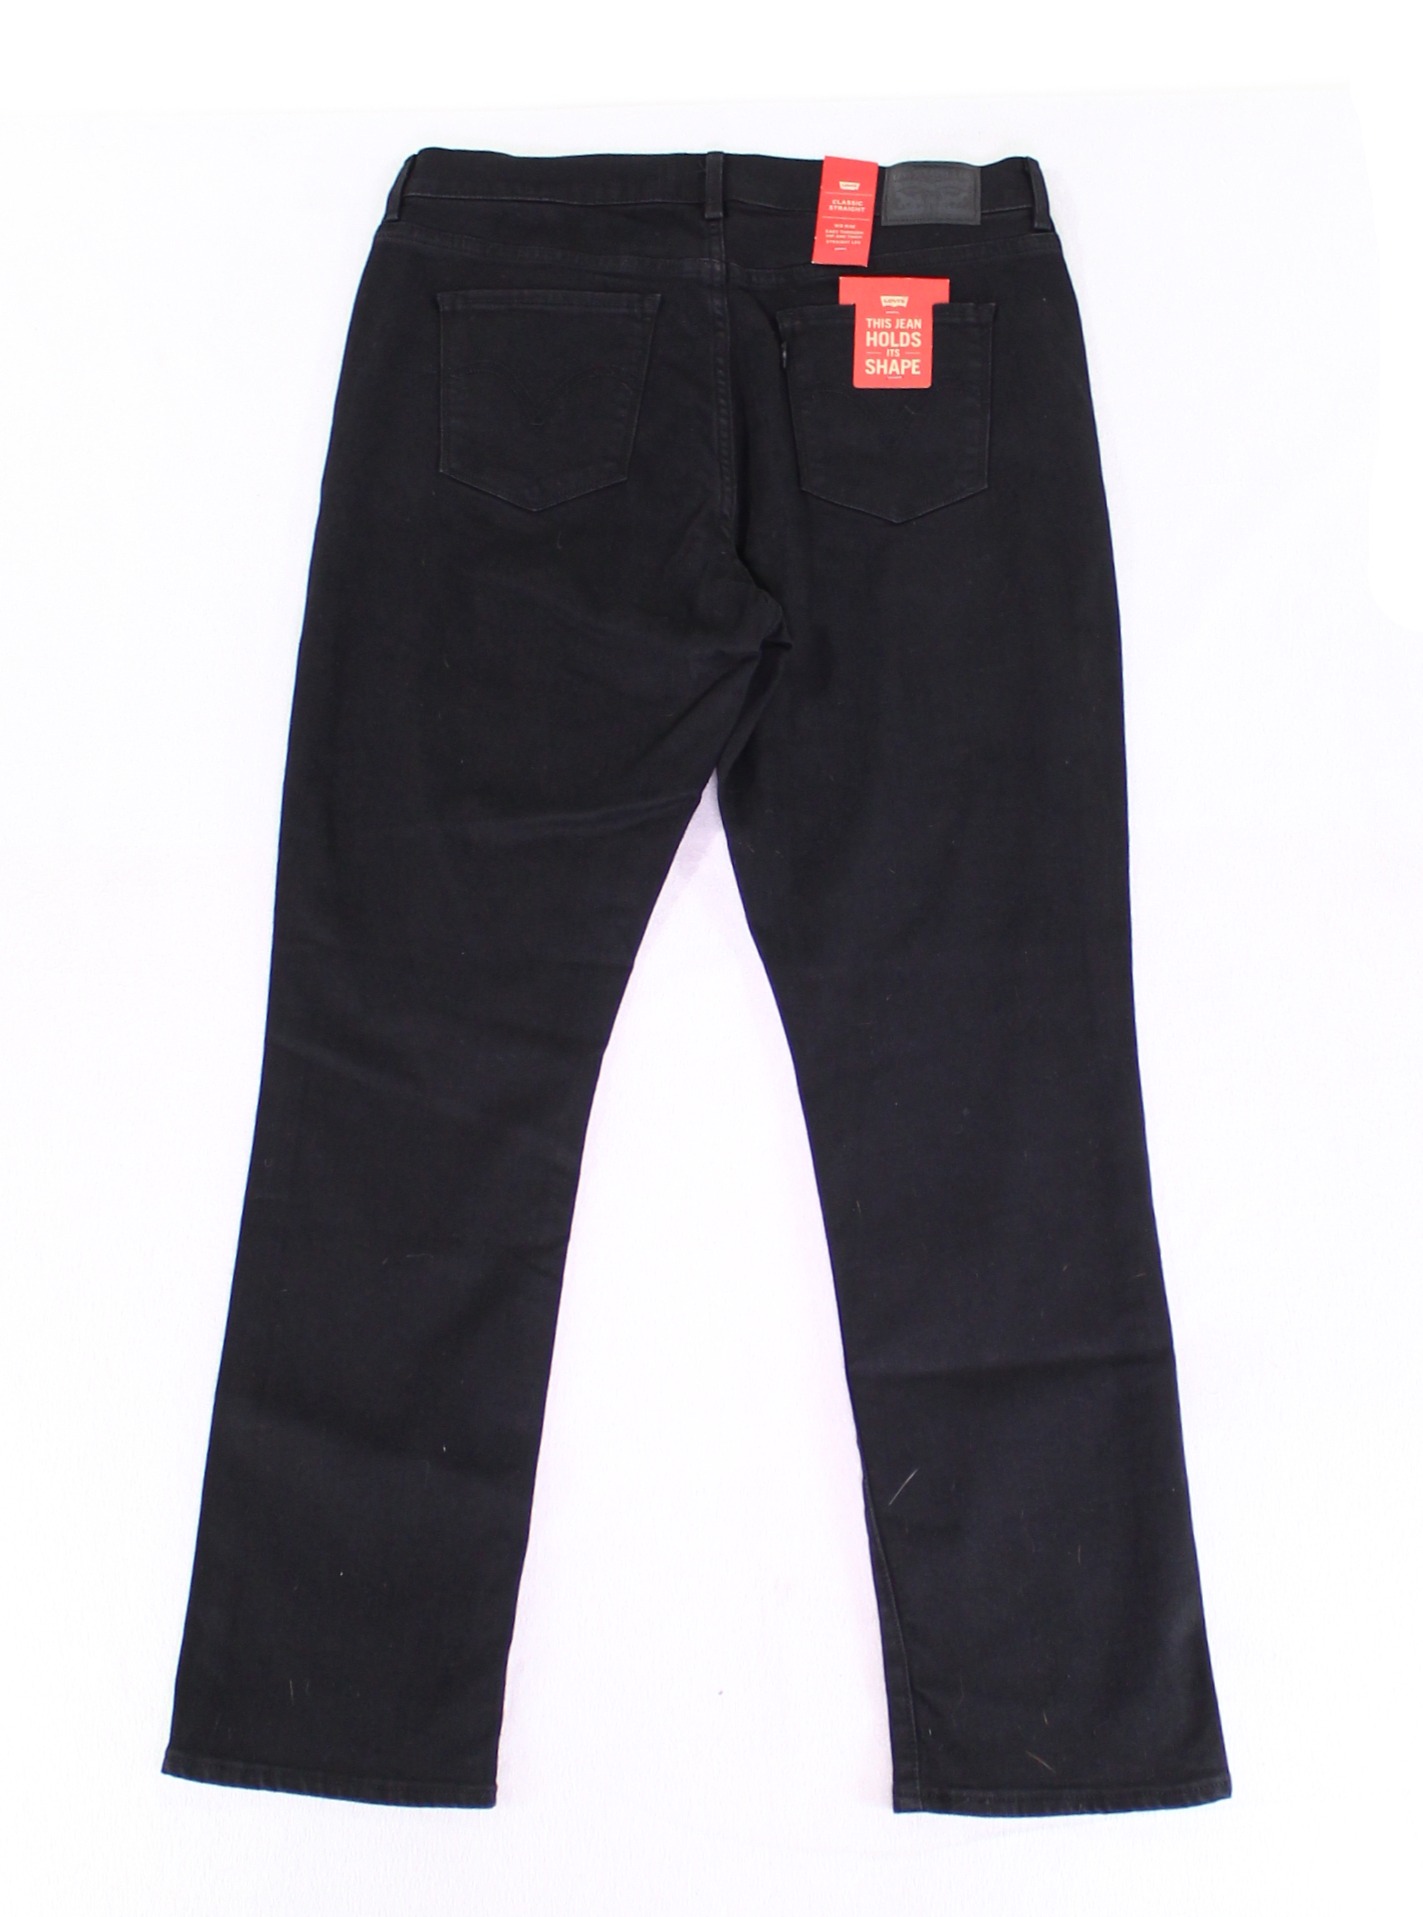 Levi’s Original Red Tab Women's Classic Straight Fit Jeans - image 2 of 3